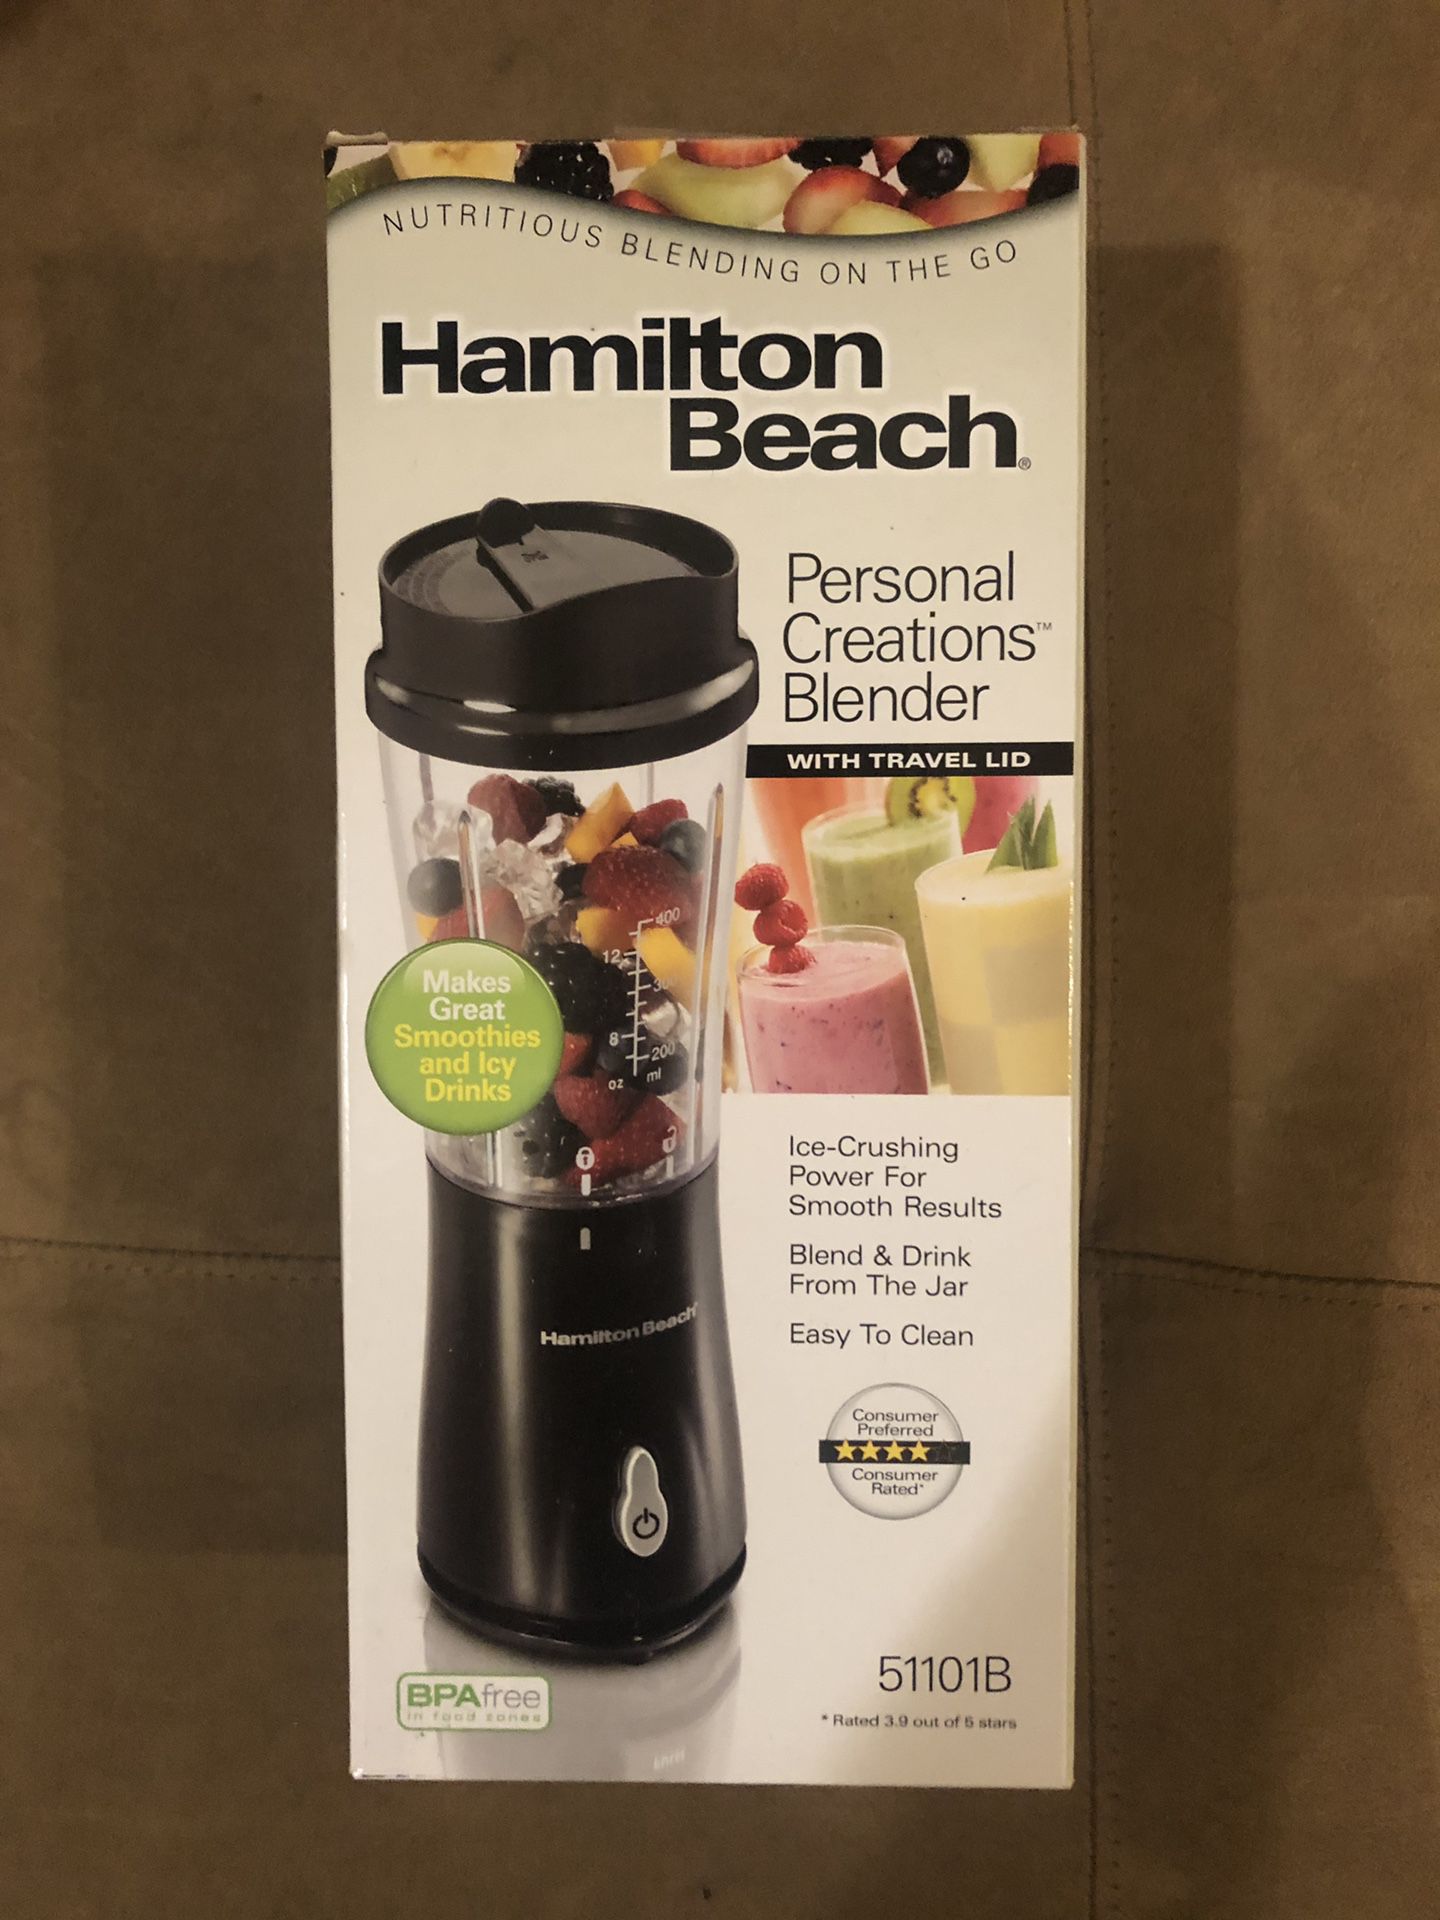 HAMILTON BEACH PERSONAL CREATIONS BLENDER BLEND AND DRINK FROM JAR BRAND NEW NEVER OPENED IN ORIGINAL PACKAGING WITH TRAVEL LID MODEL 51101B